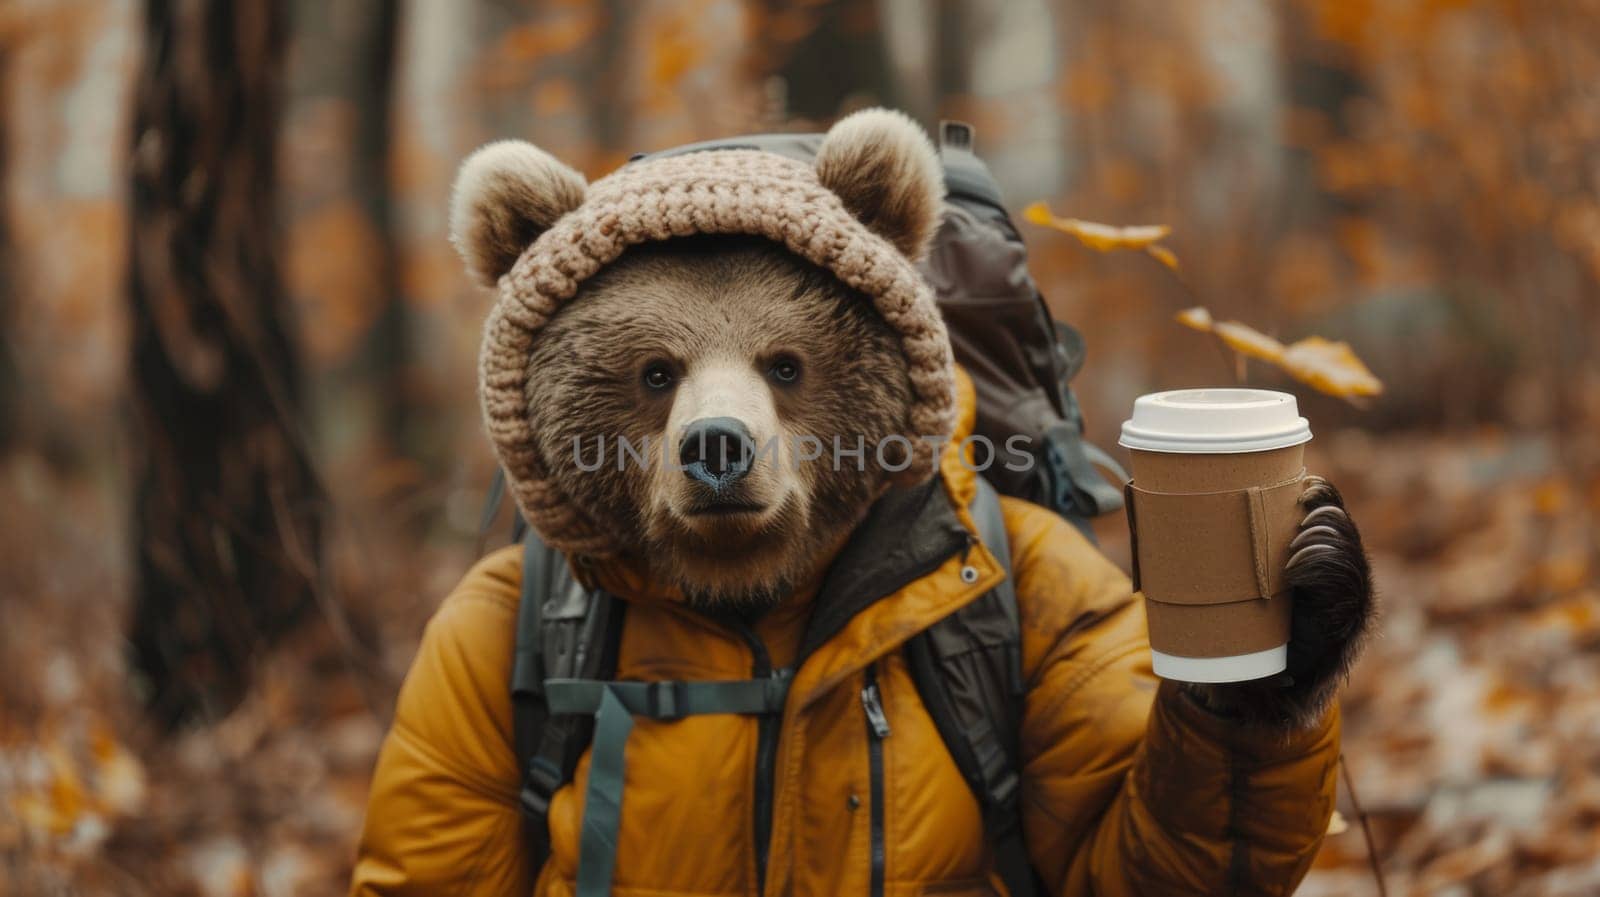 A bear in a winter coat holding up coffee and wearing a hat, AI by starush